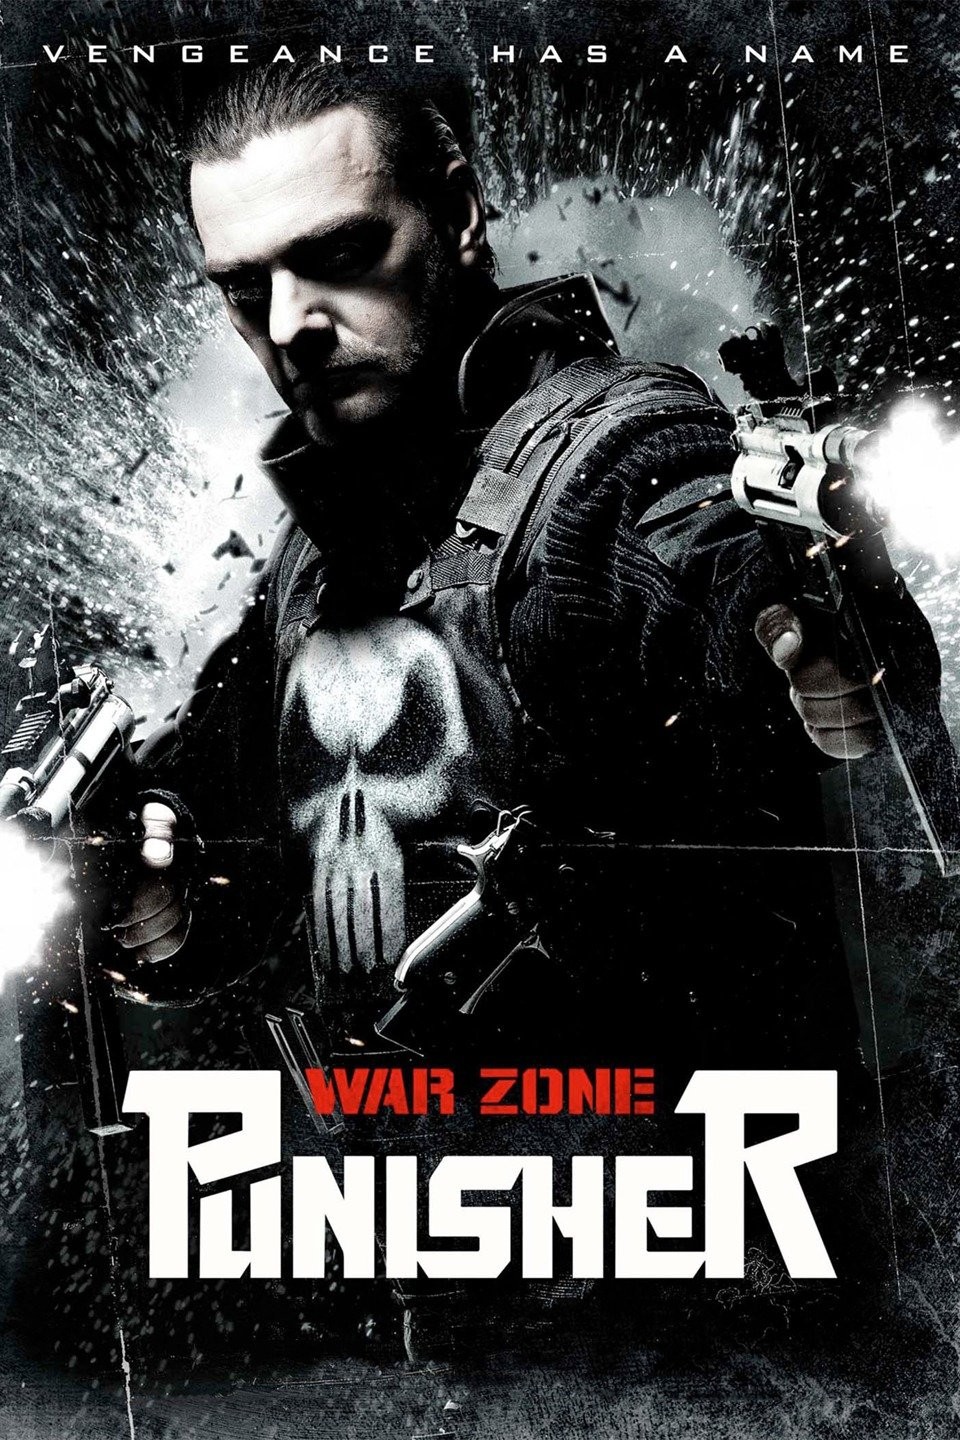 Andy's Review: Punisher: War Zone - The Real Punisher